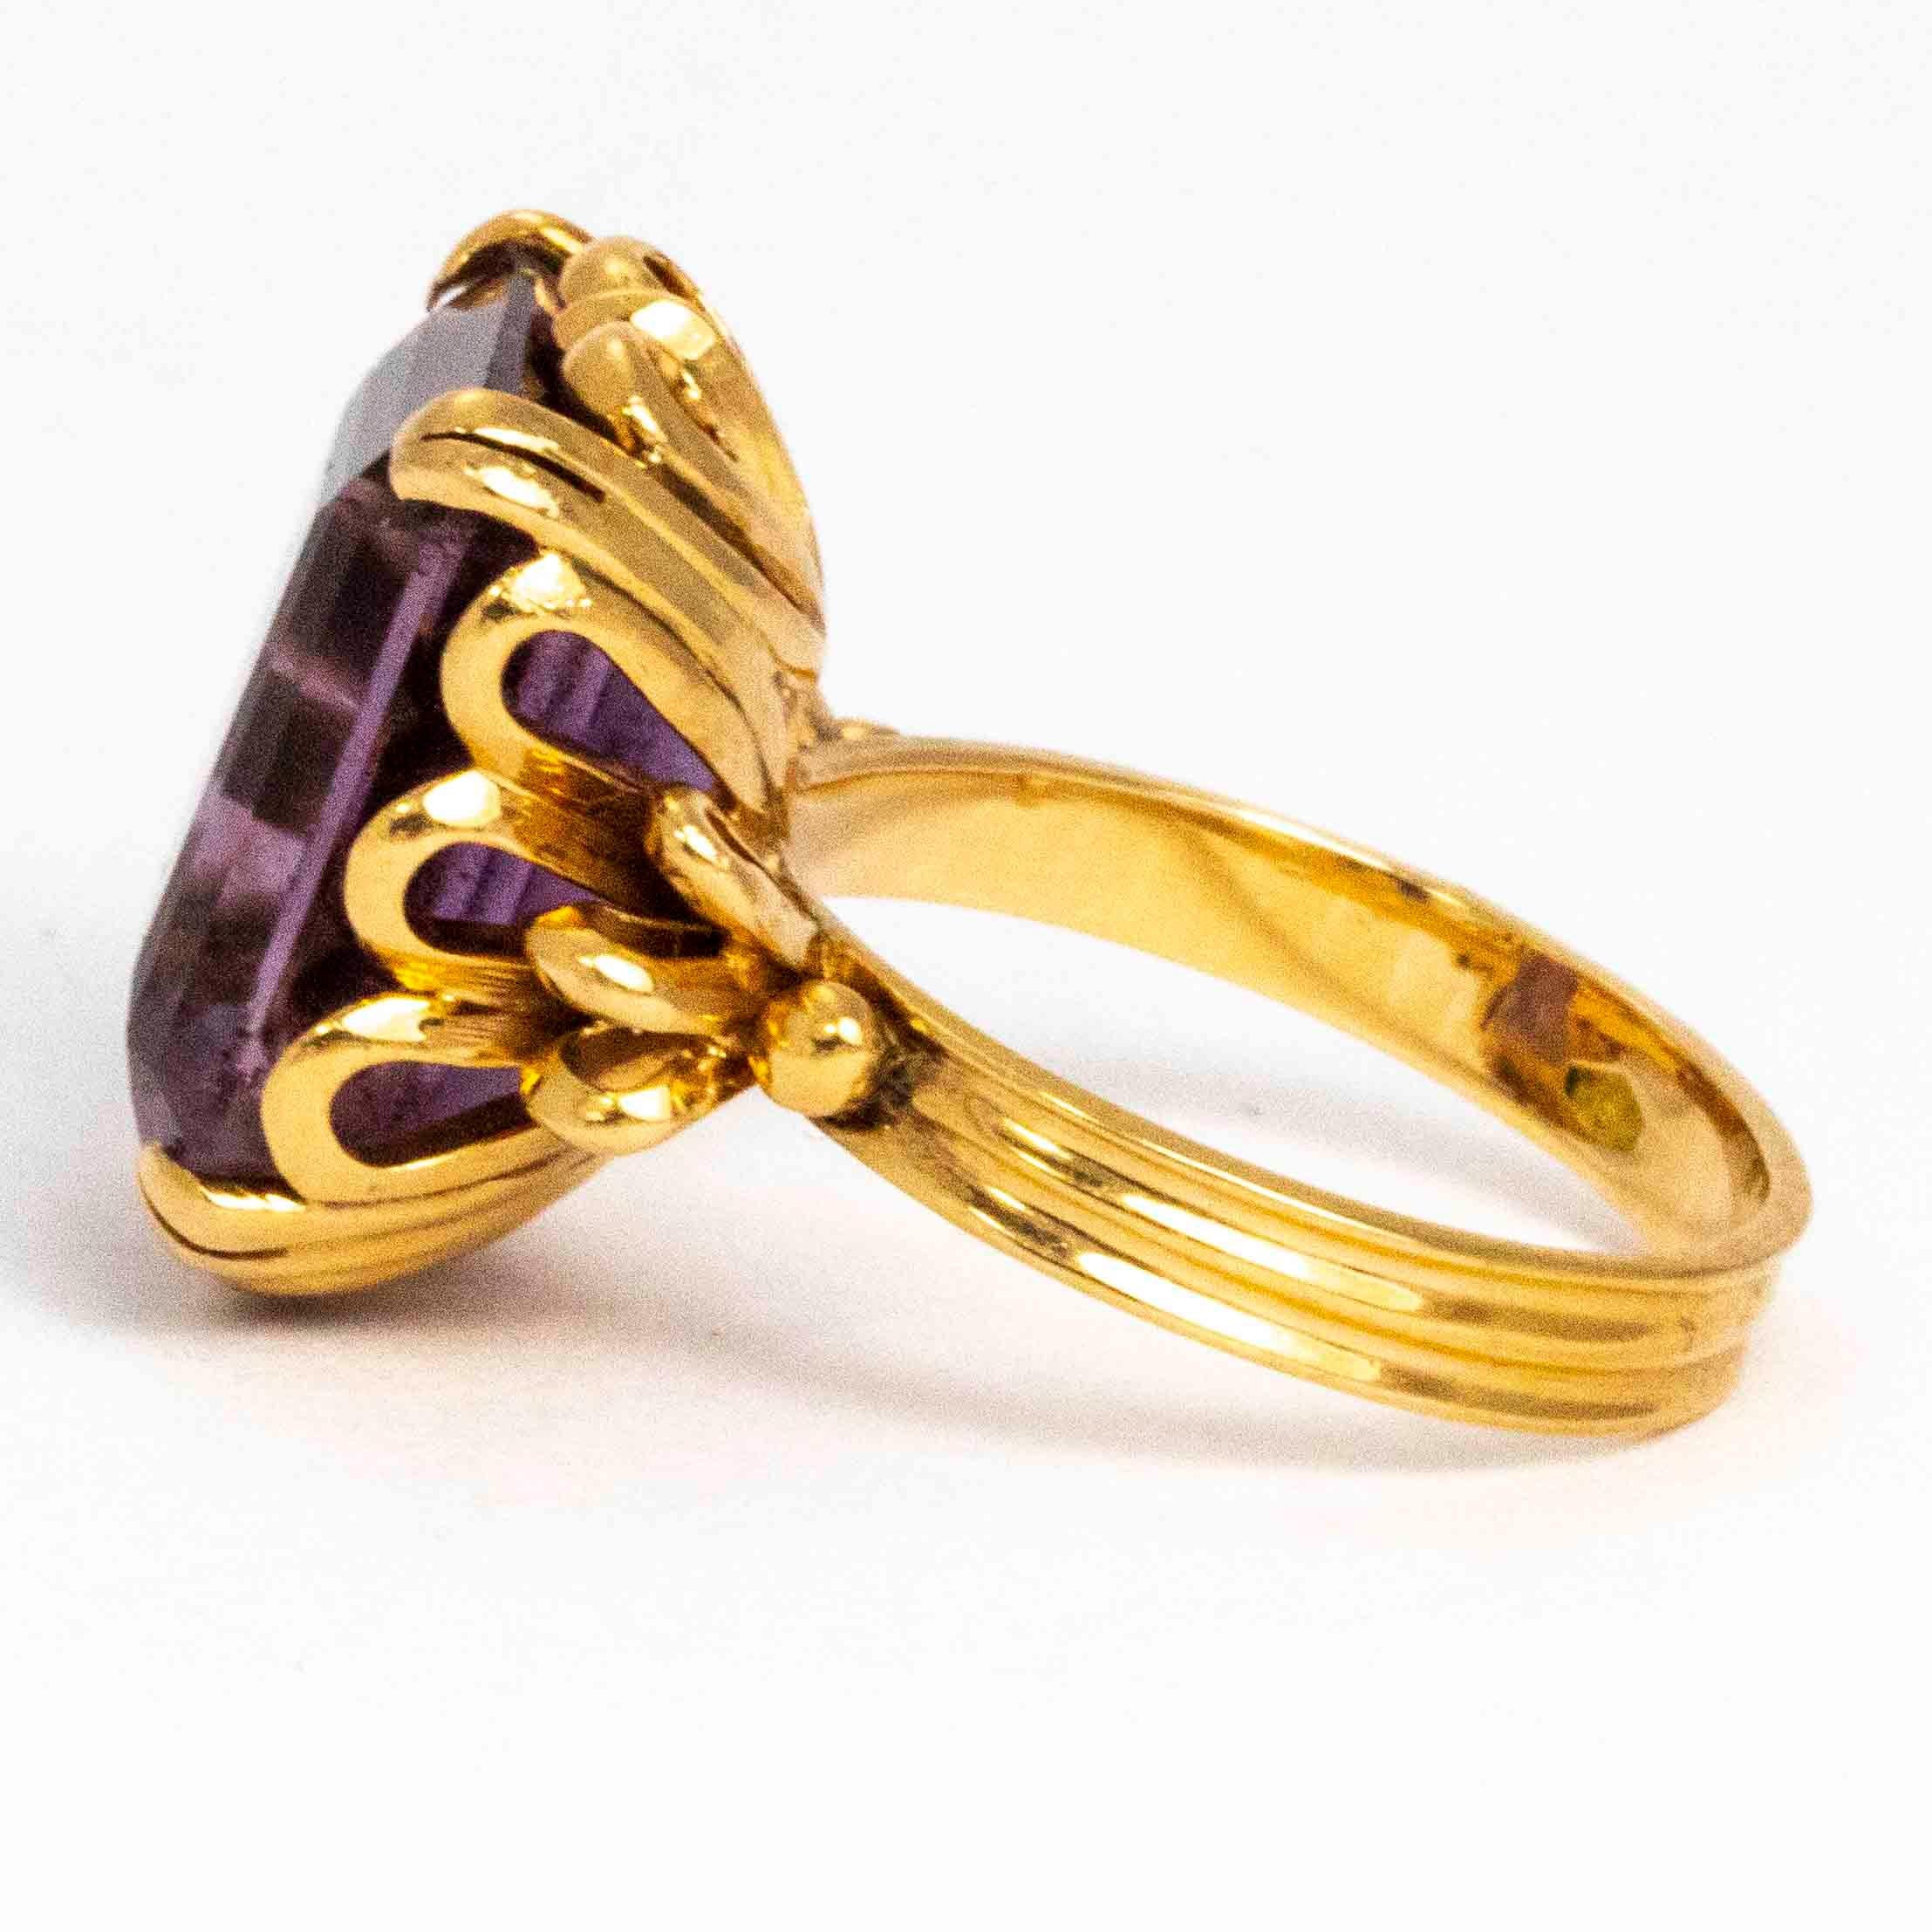 This Amethyst ring has the most wonderful setting! The 18carat gold is modelled into hearts and feature wonderful folds of gold either side of the purple stone. The size of this stone is absolutely perfect for a statement piece! 

Ring Size: K 1/2